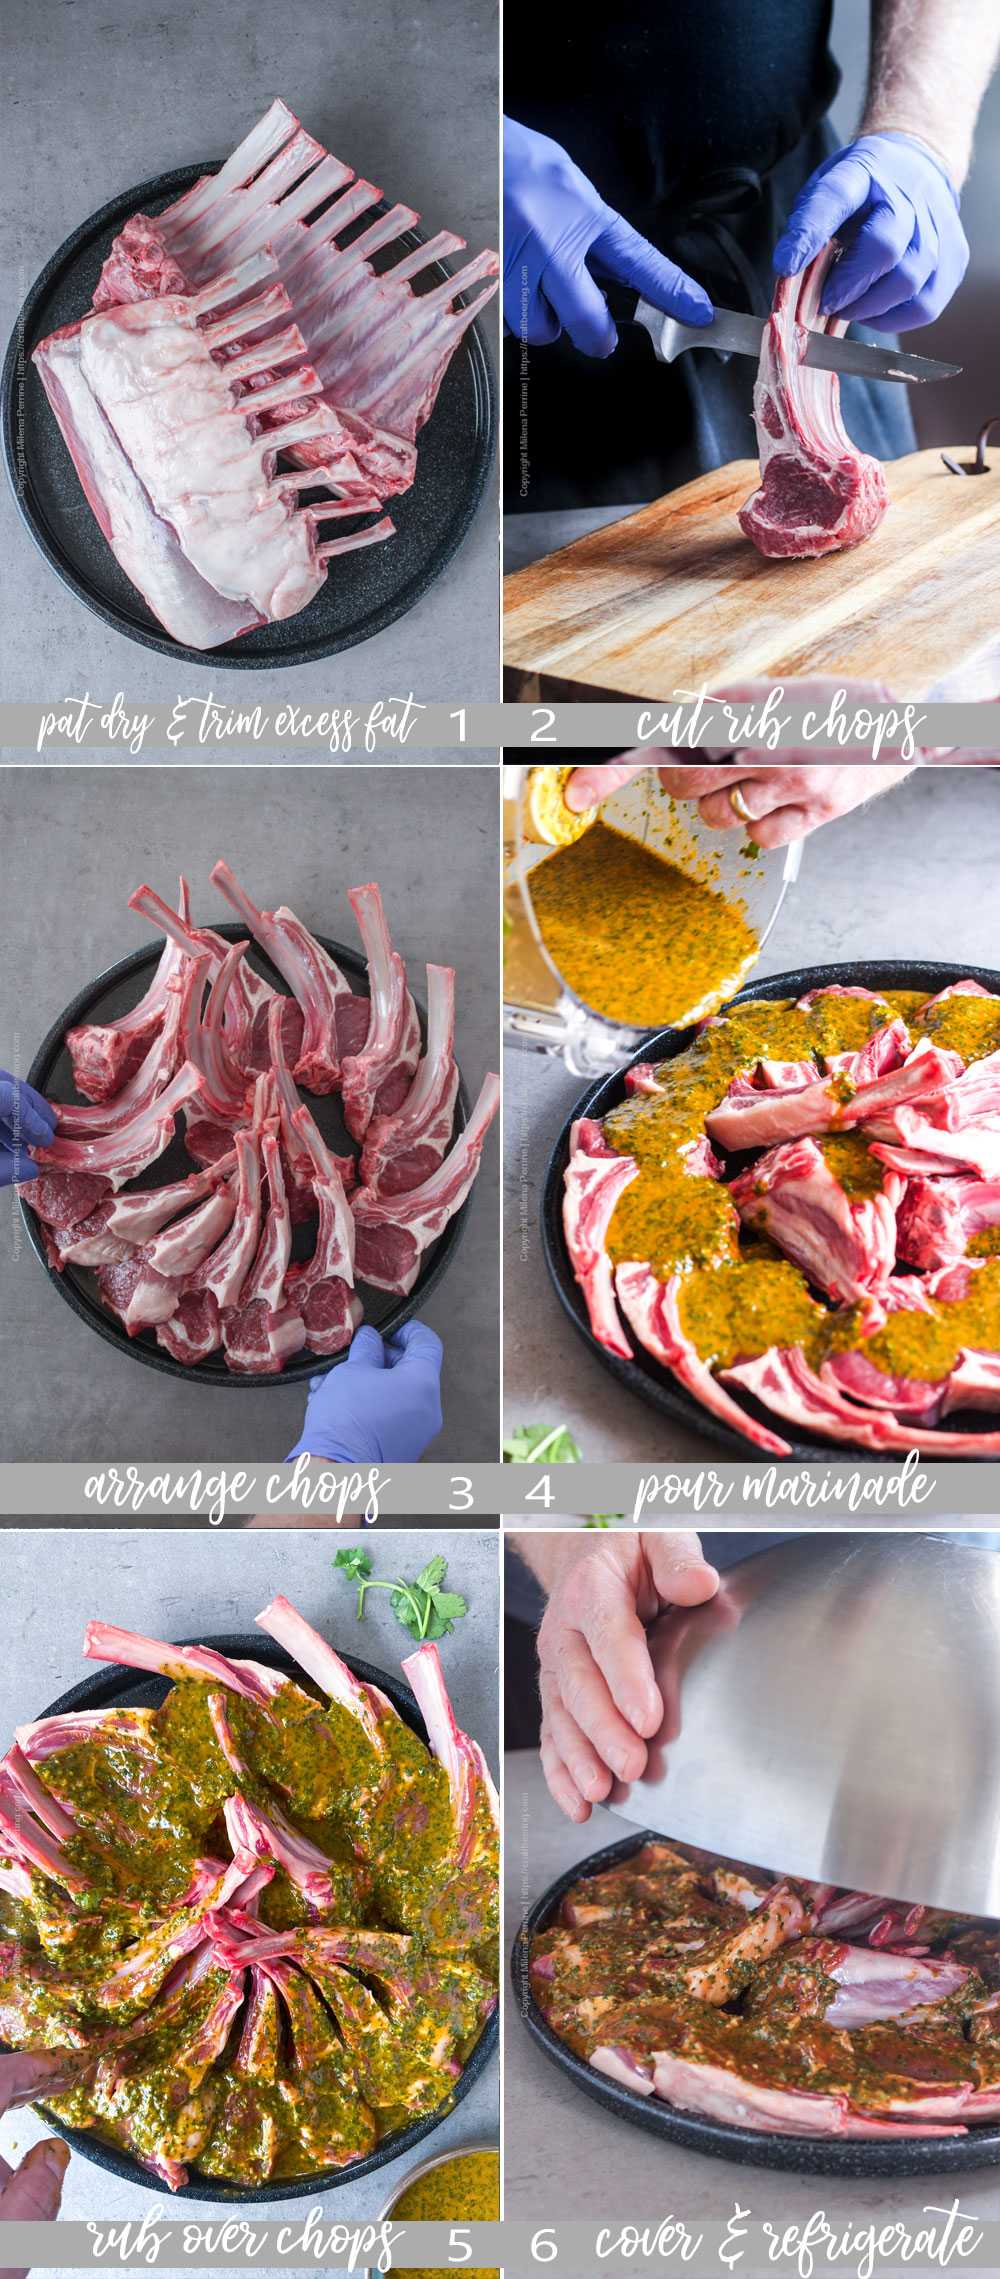 How to pan sear or grill lamb chops for lollipops.